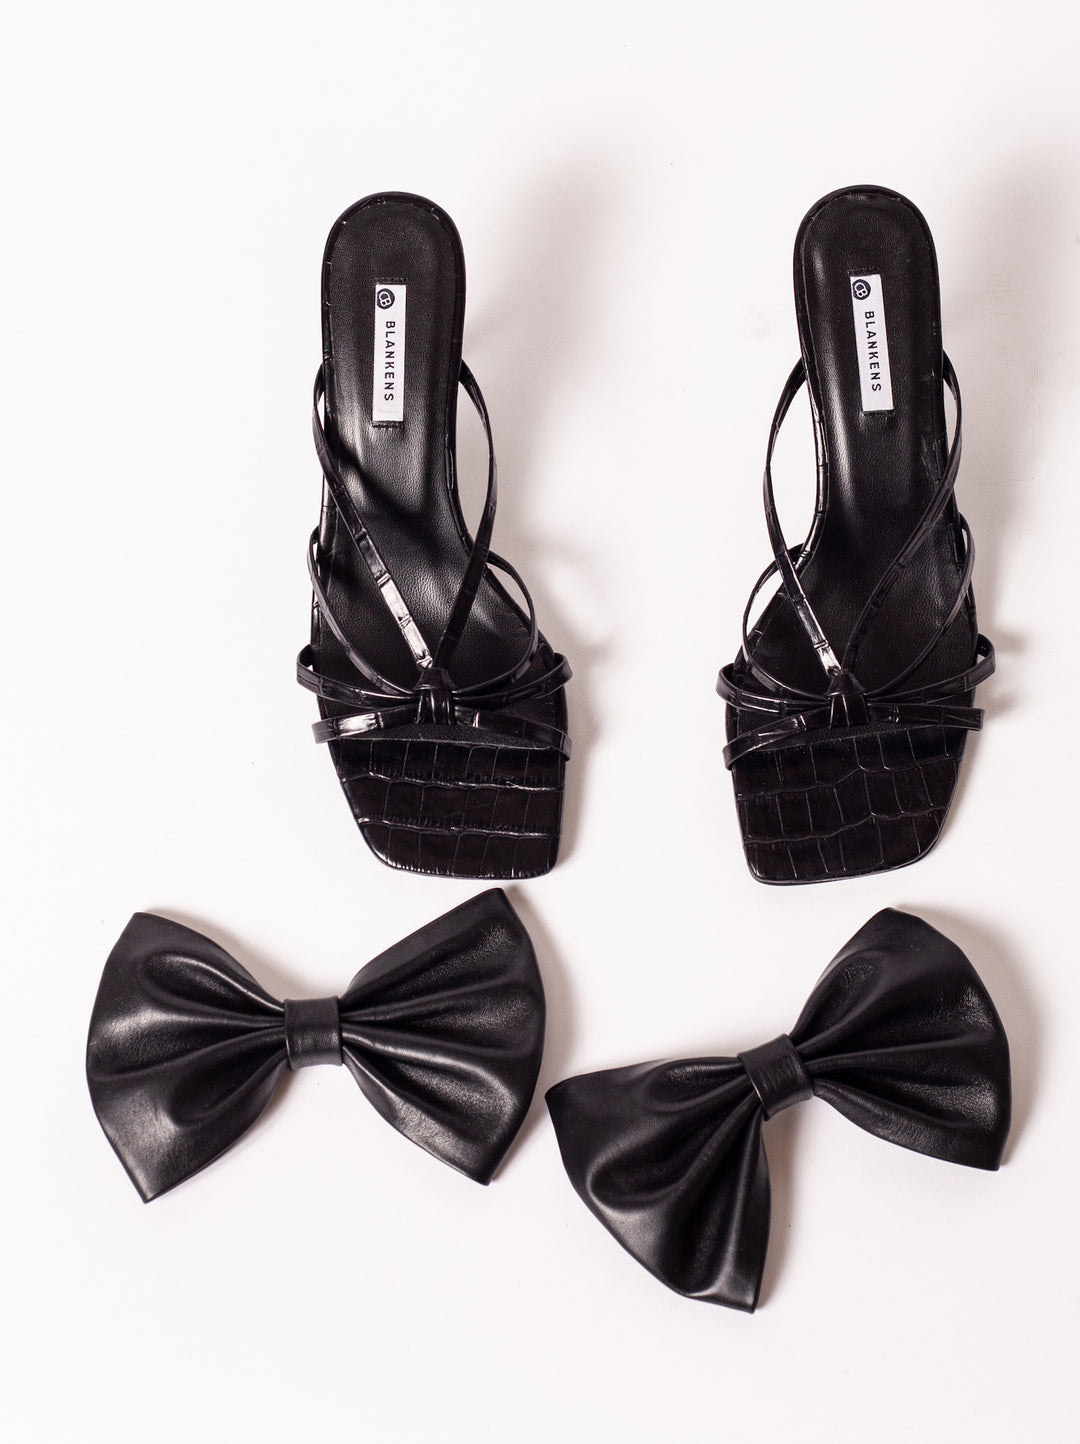 Blankens clip-on bows in black leather with sandals in black croc